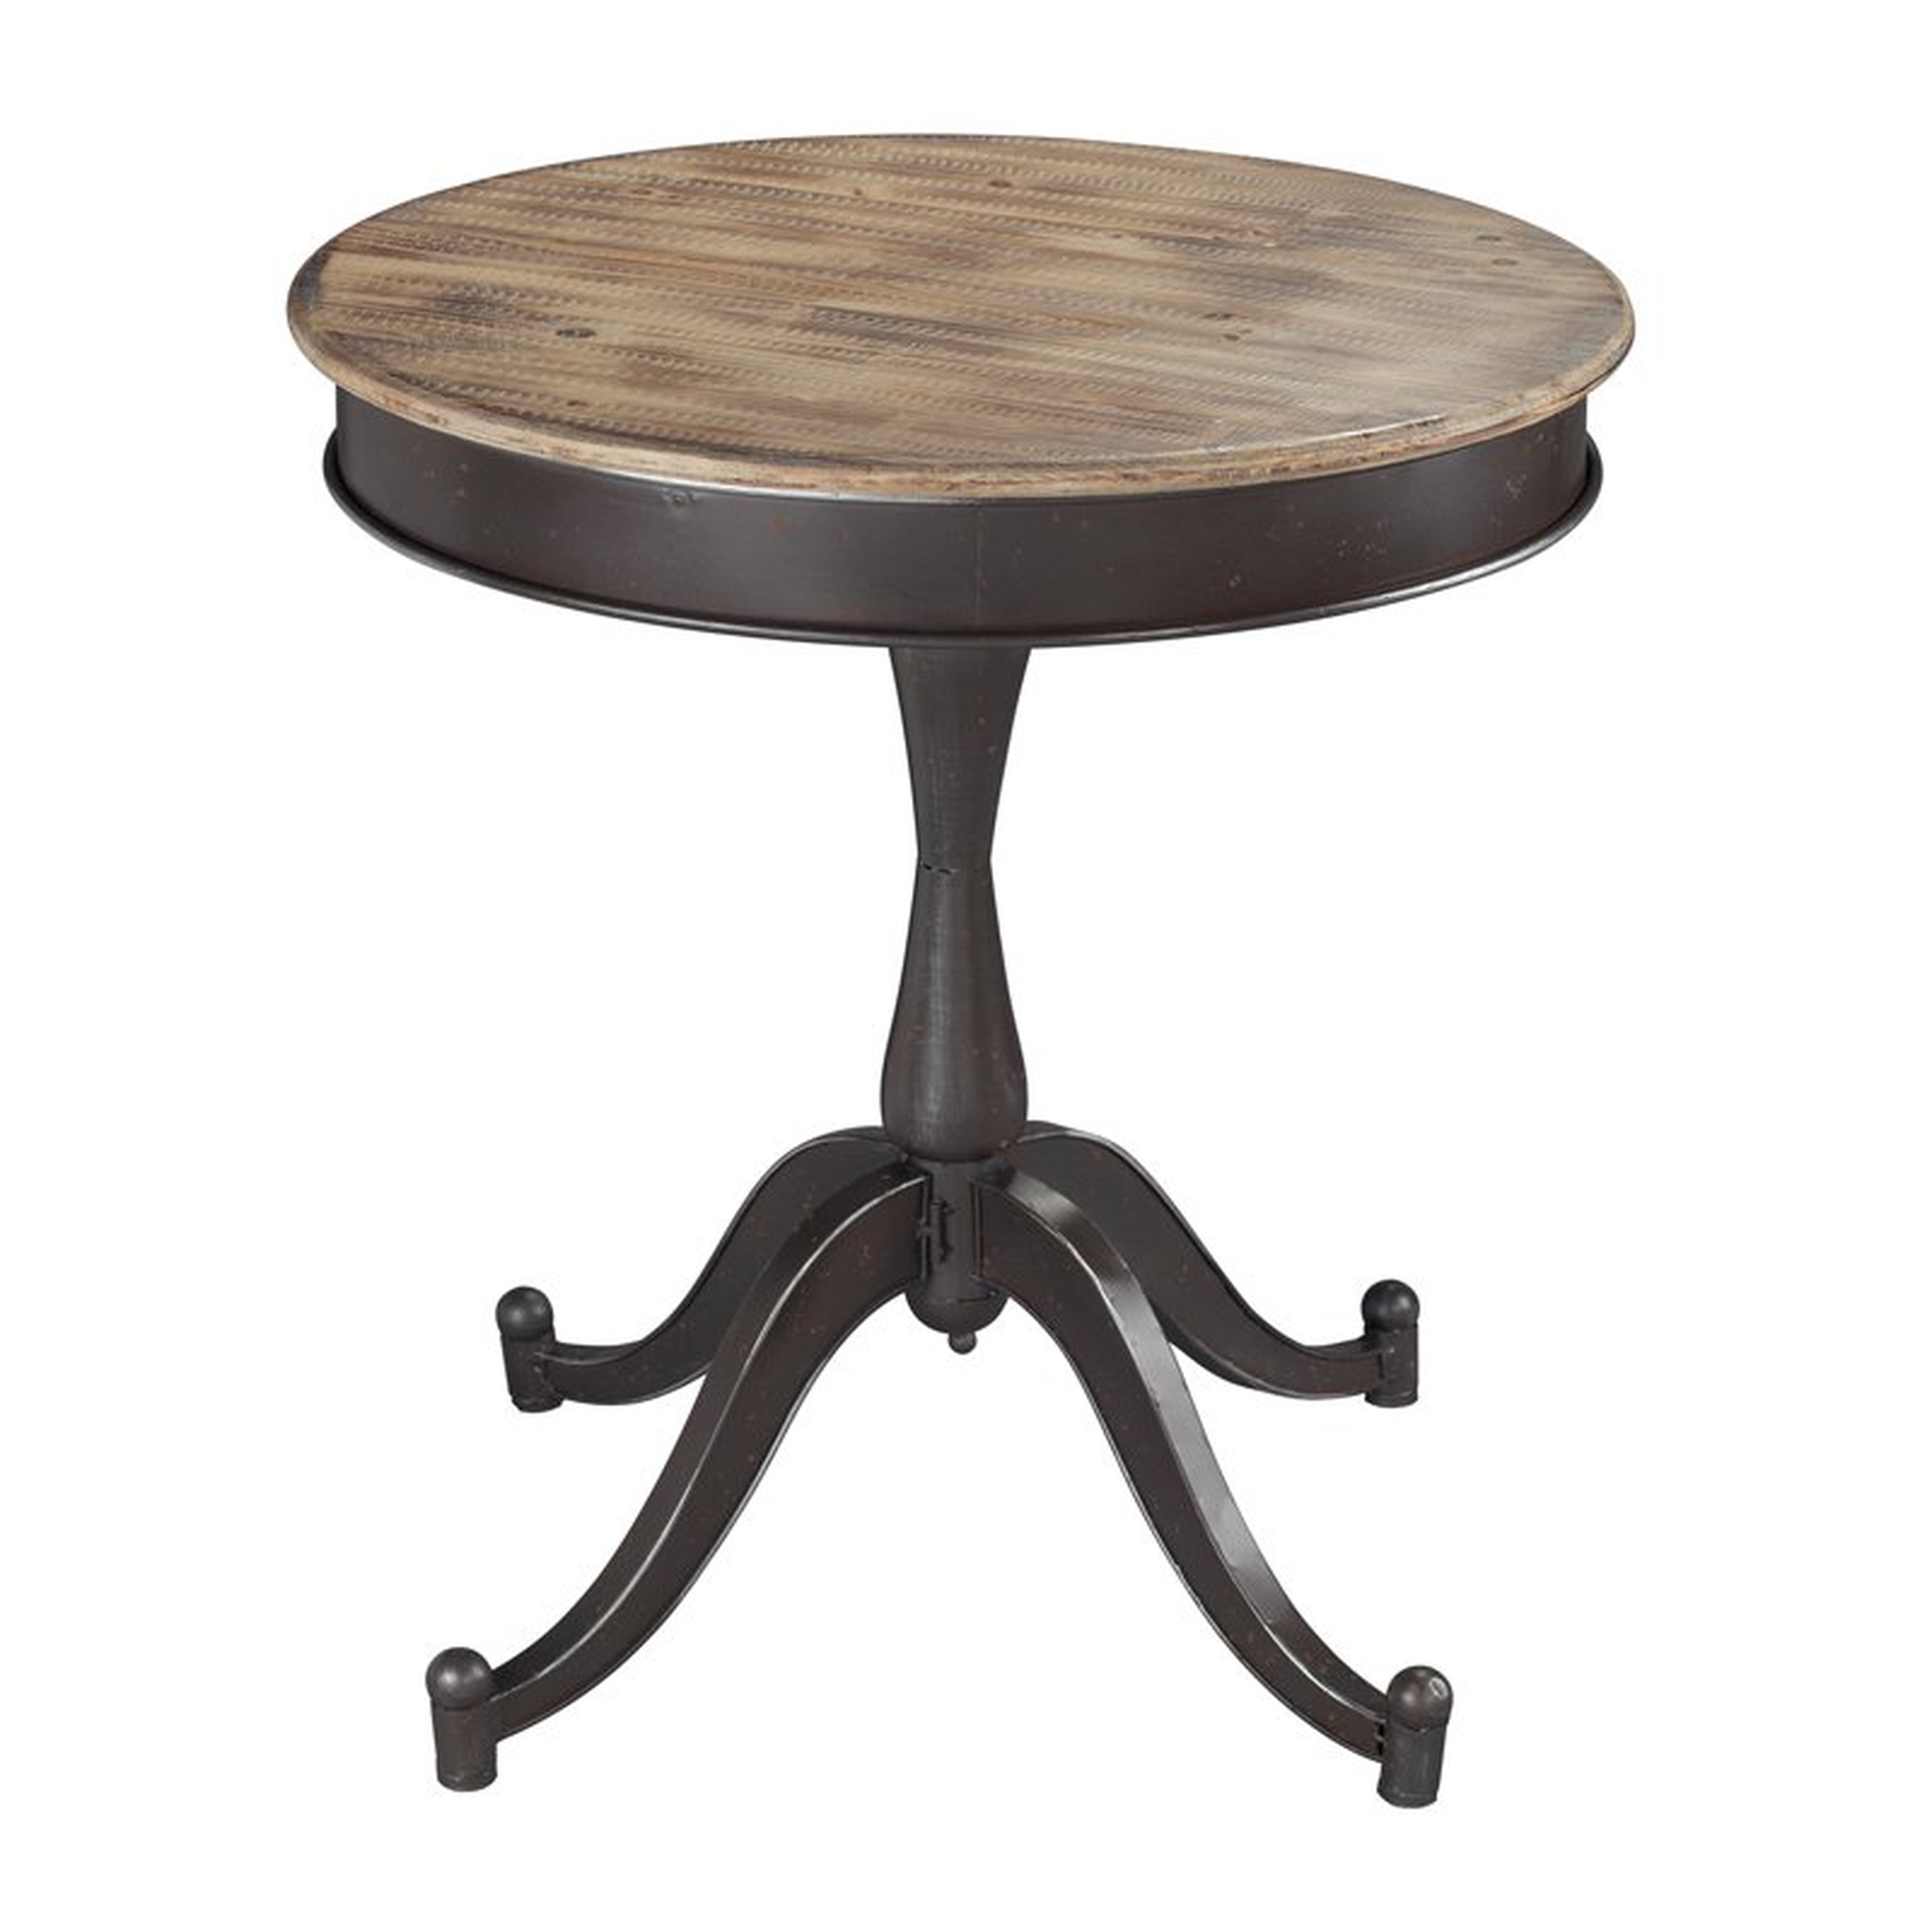 INDUSTRIAL SIDE TABLE WITH WOOD - Elk Home